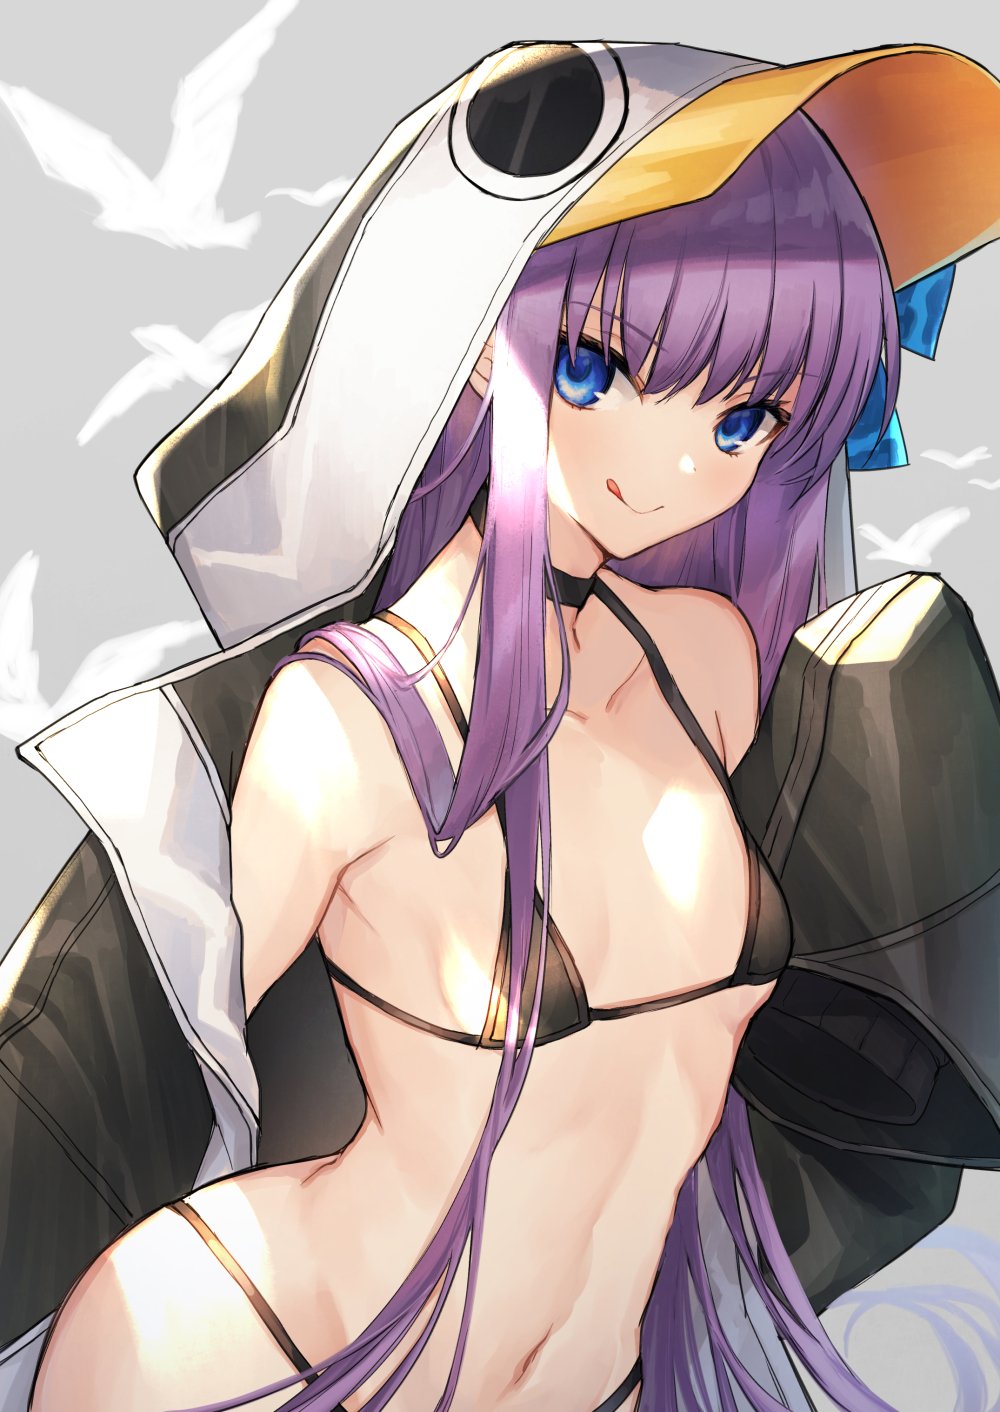 Anime 1000x1412 Fate/Grand Order Fate series anime girls anime Meltlilith Coyucom